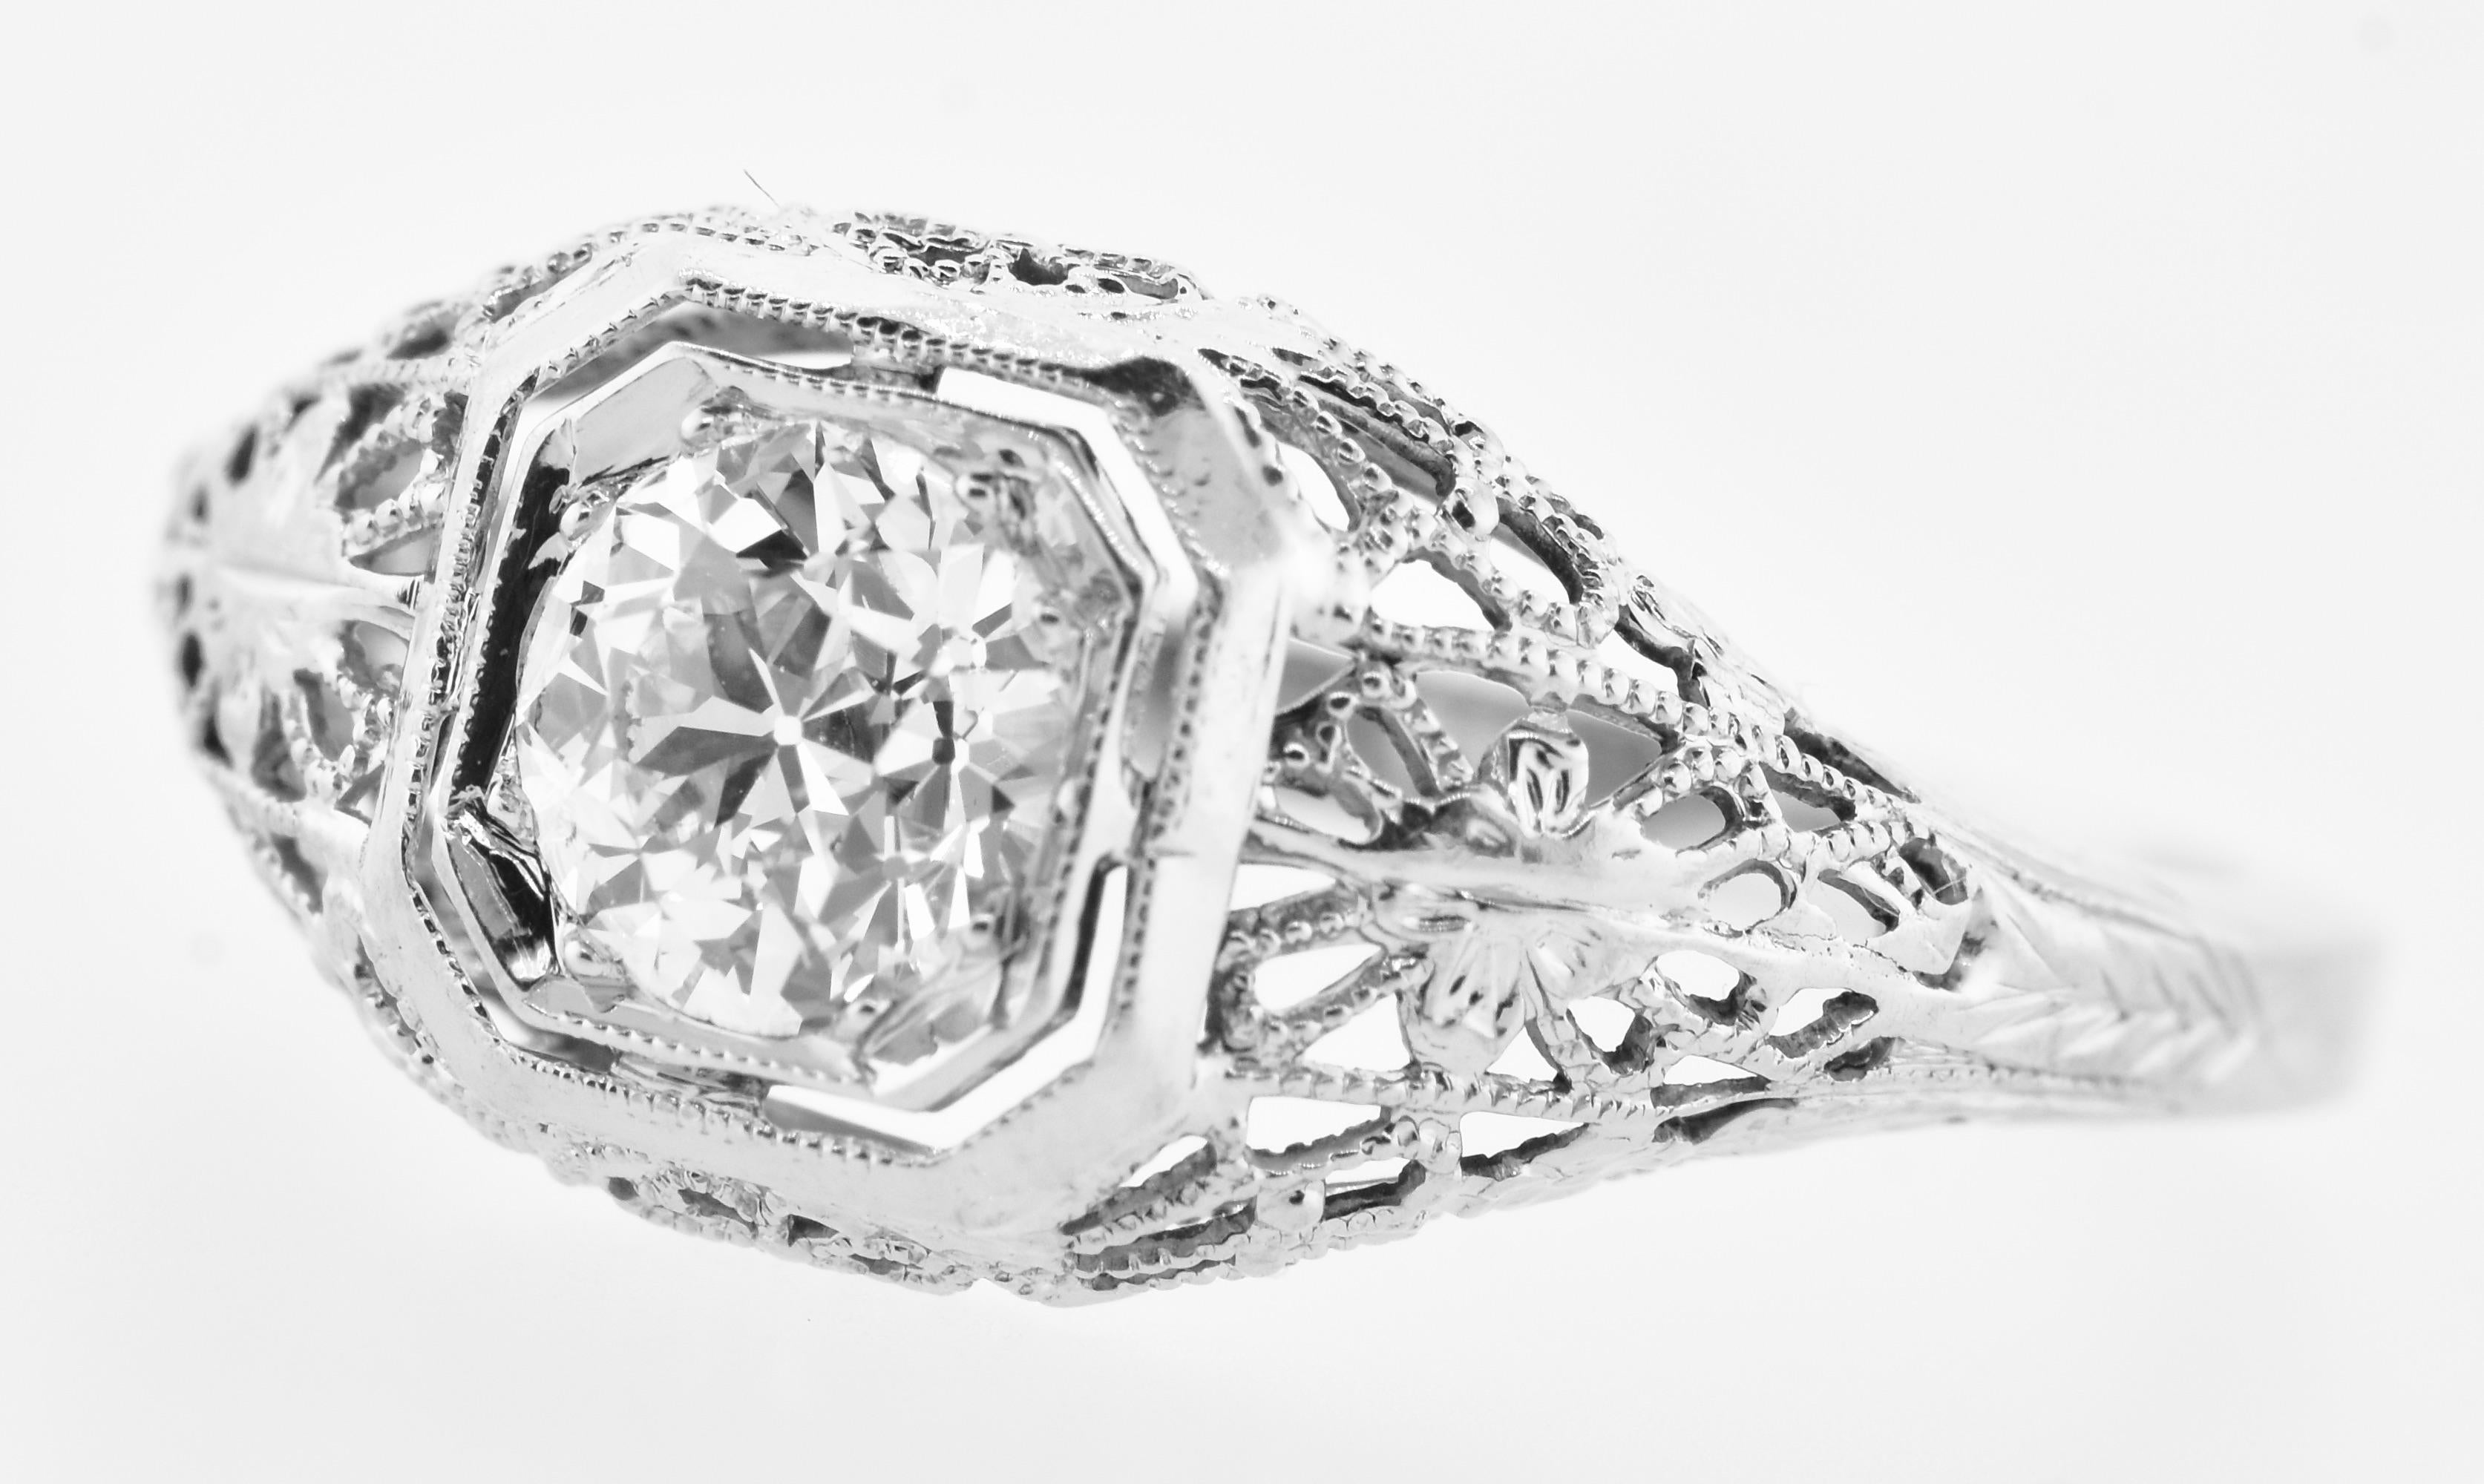 Antique Filigree Ring Fine .65 Ct. Diamond and 18K White Gold, American, c. 1920 In Excellent Condition For Sale In Aspen, CO